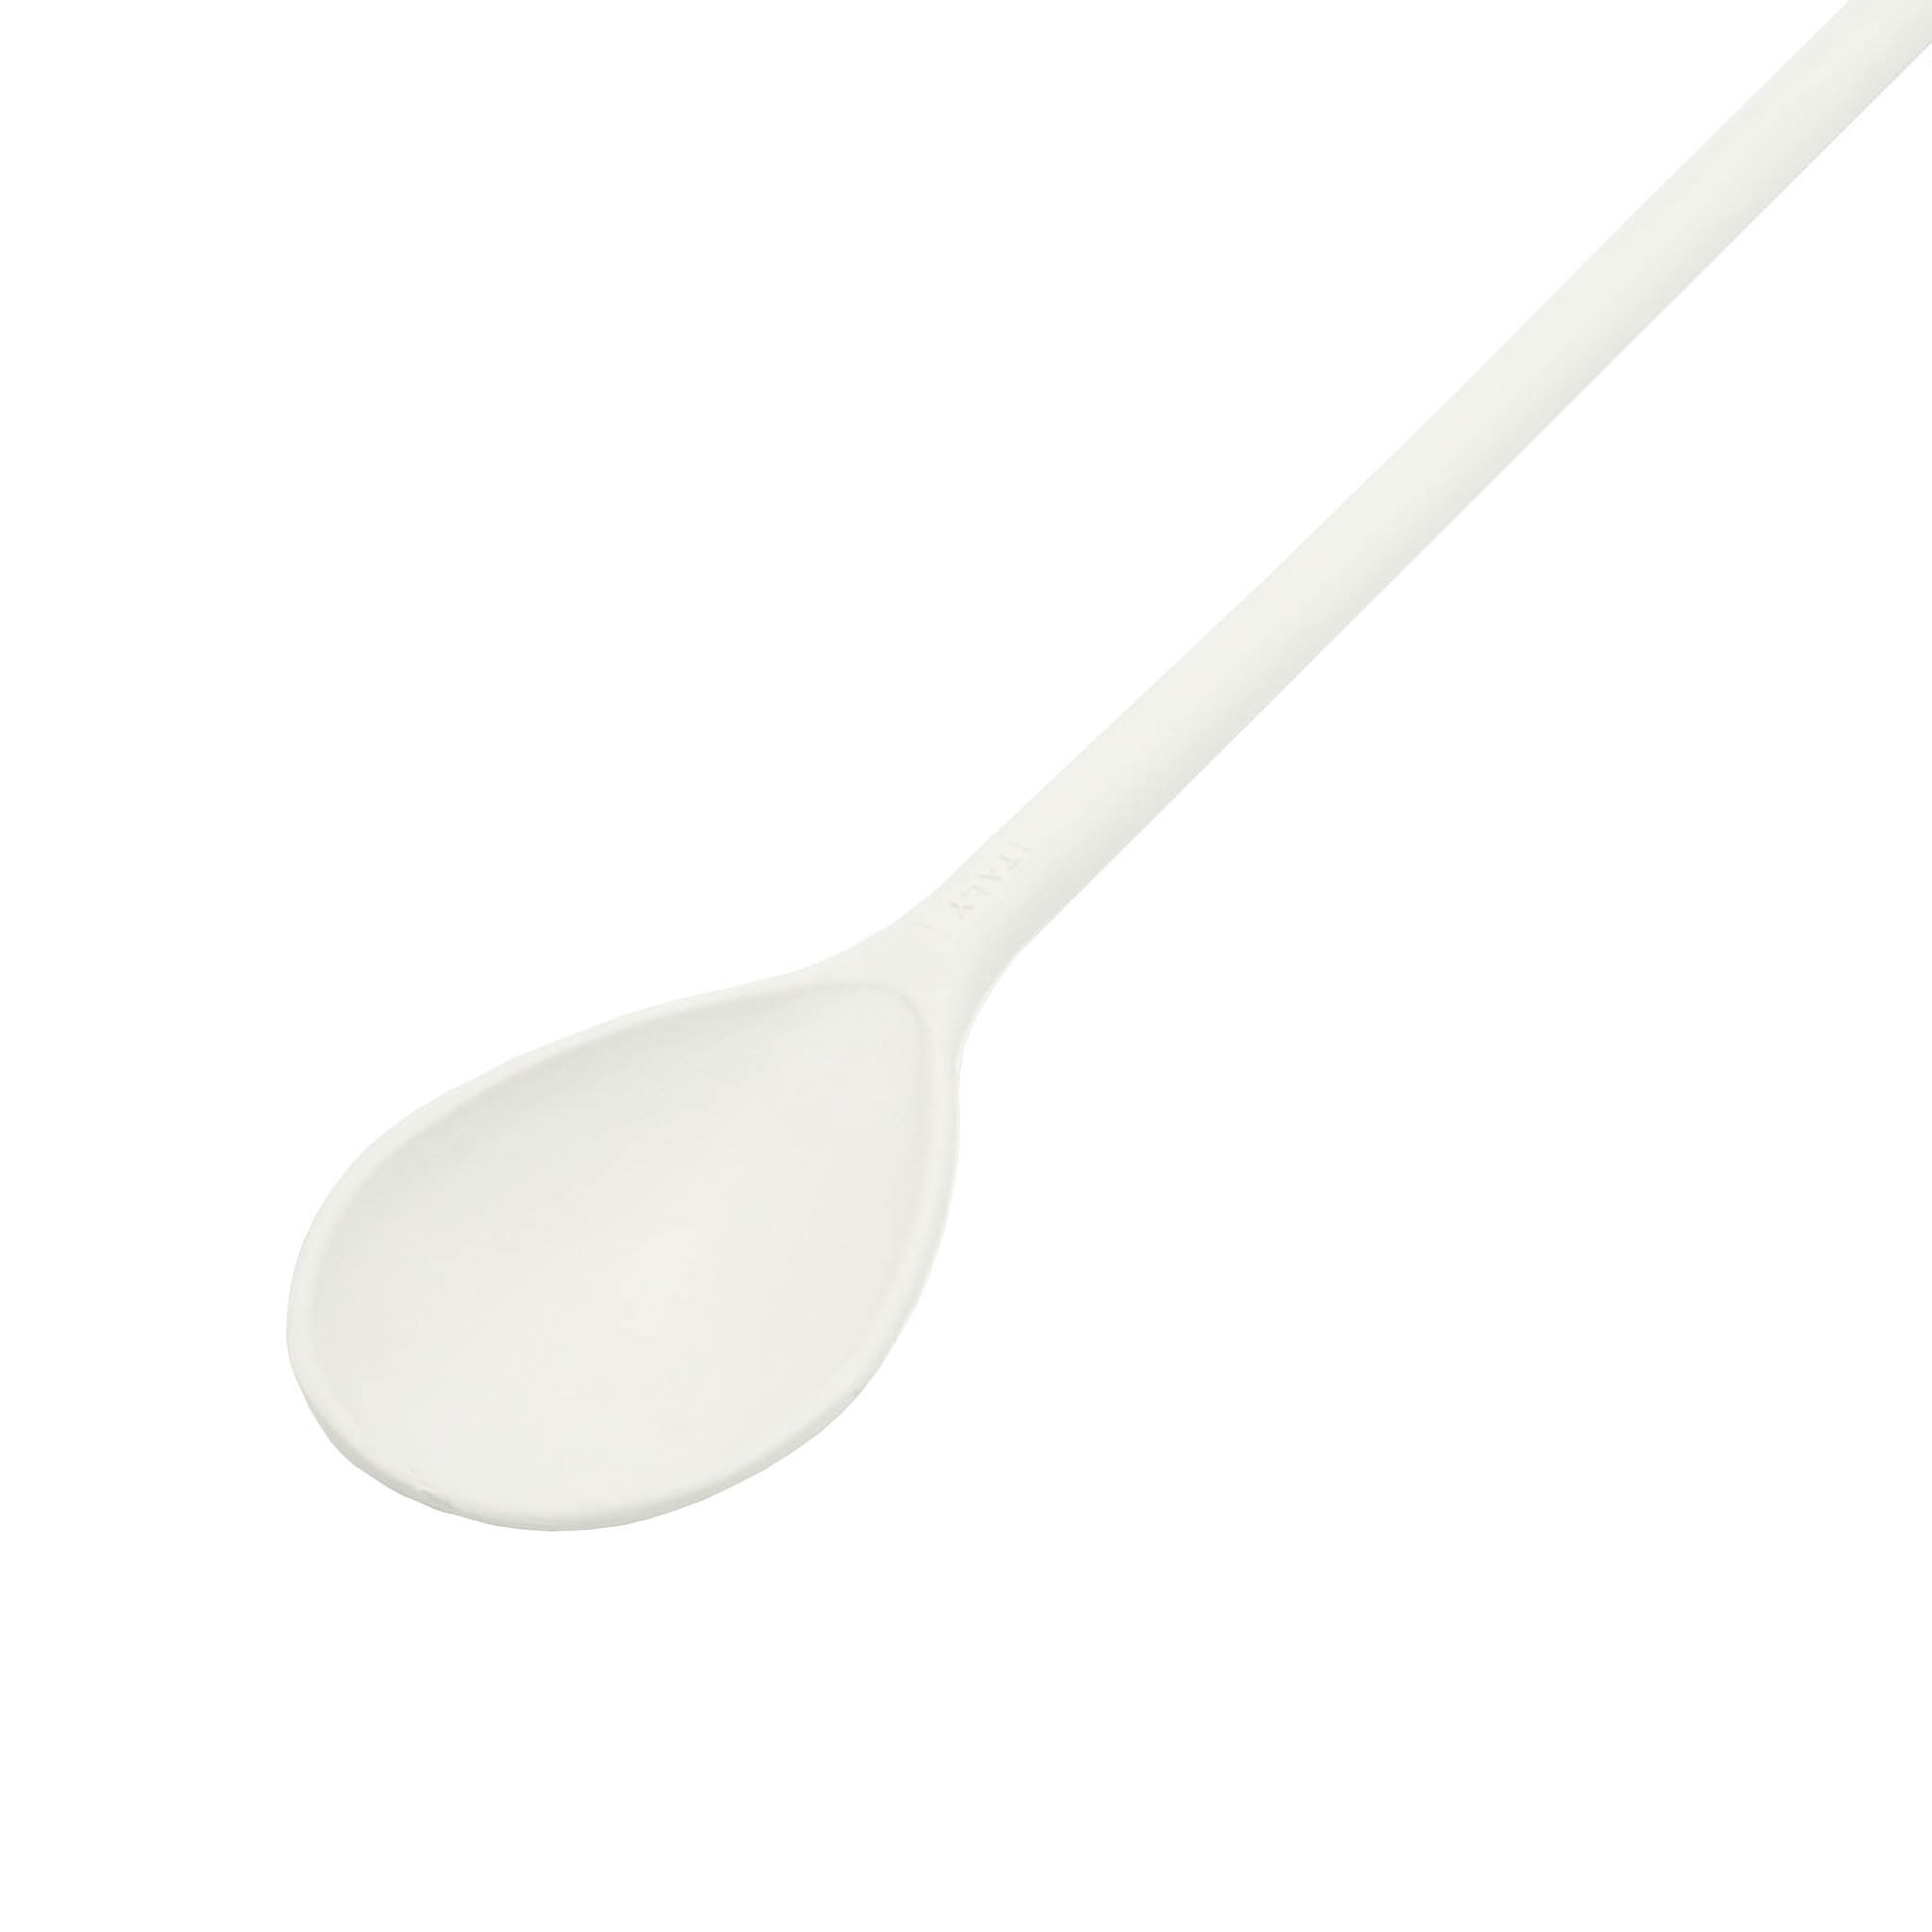 white food grade plastic spoon with 50cm long handle. 